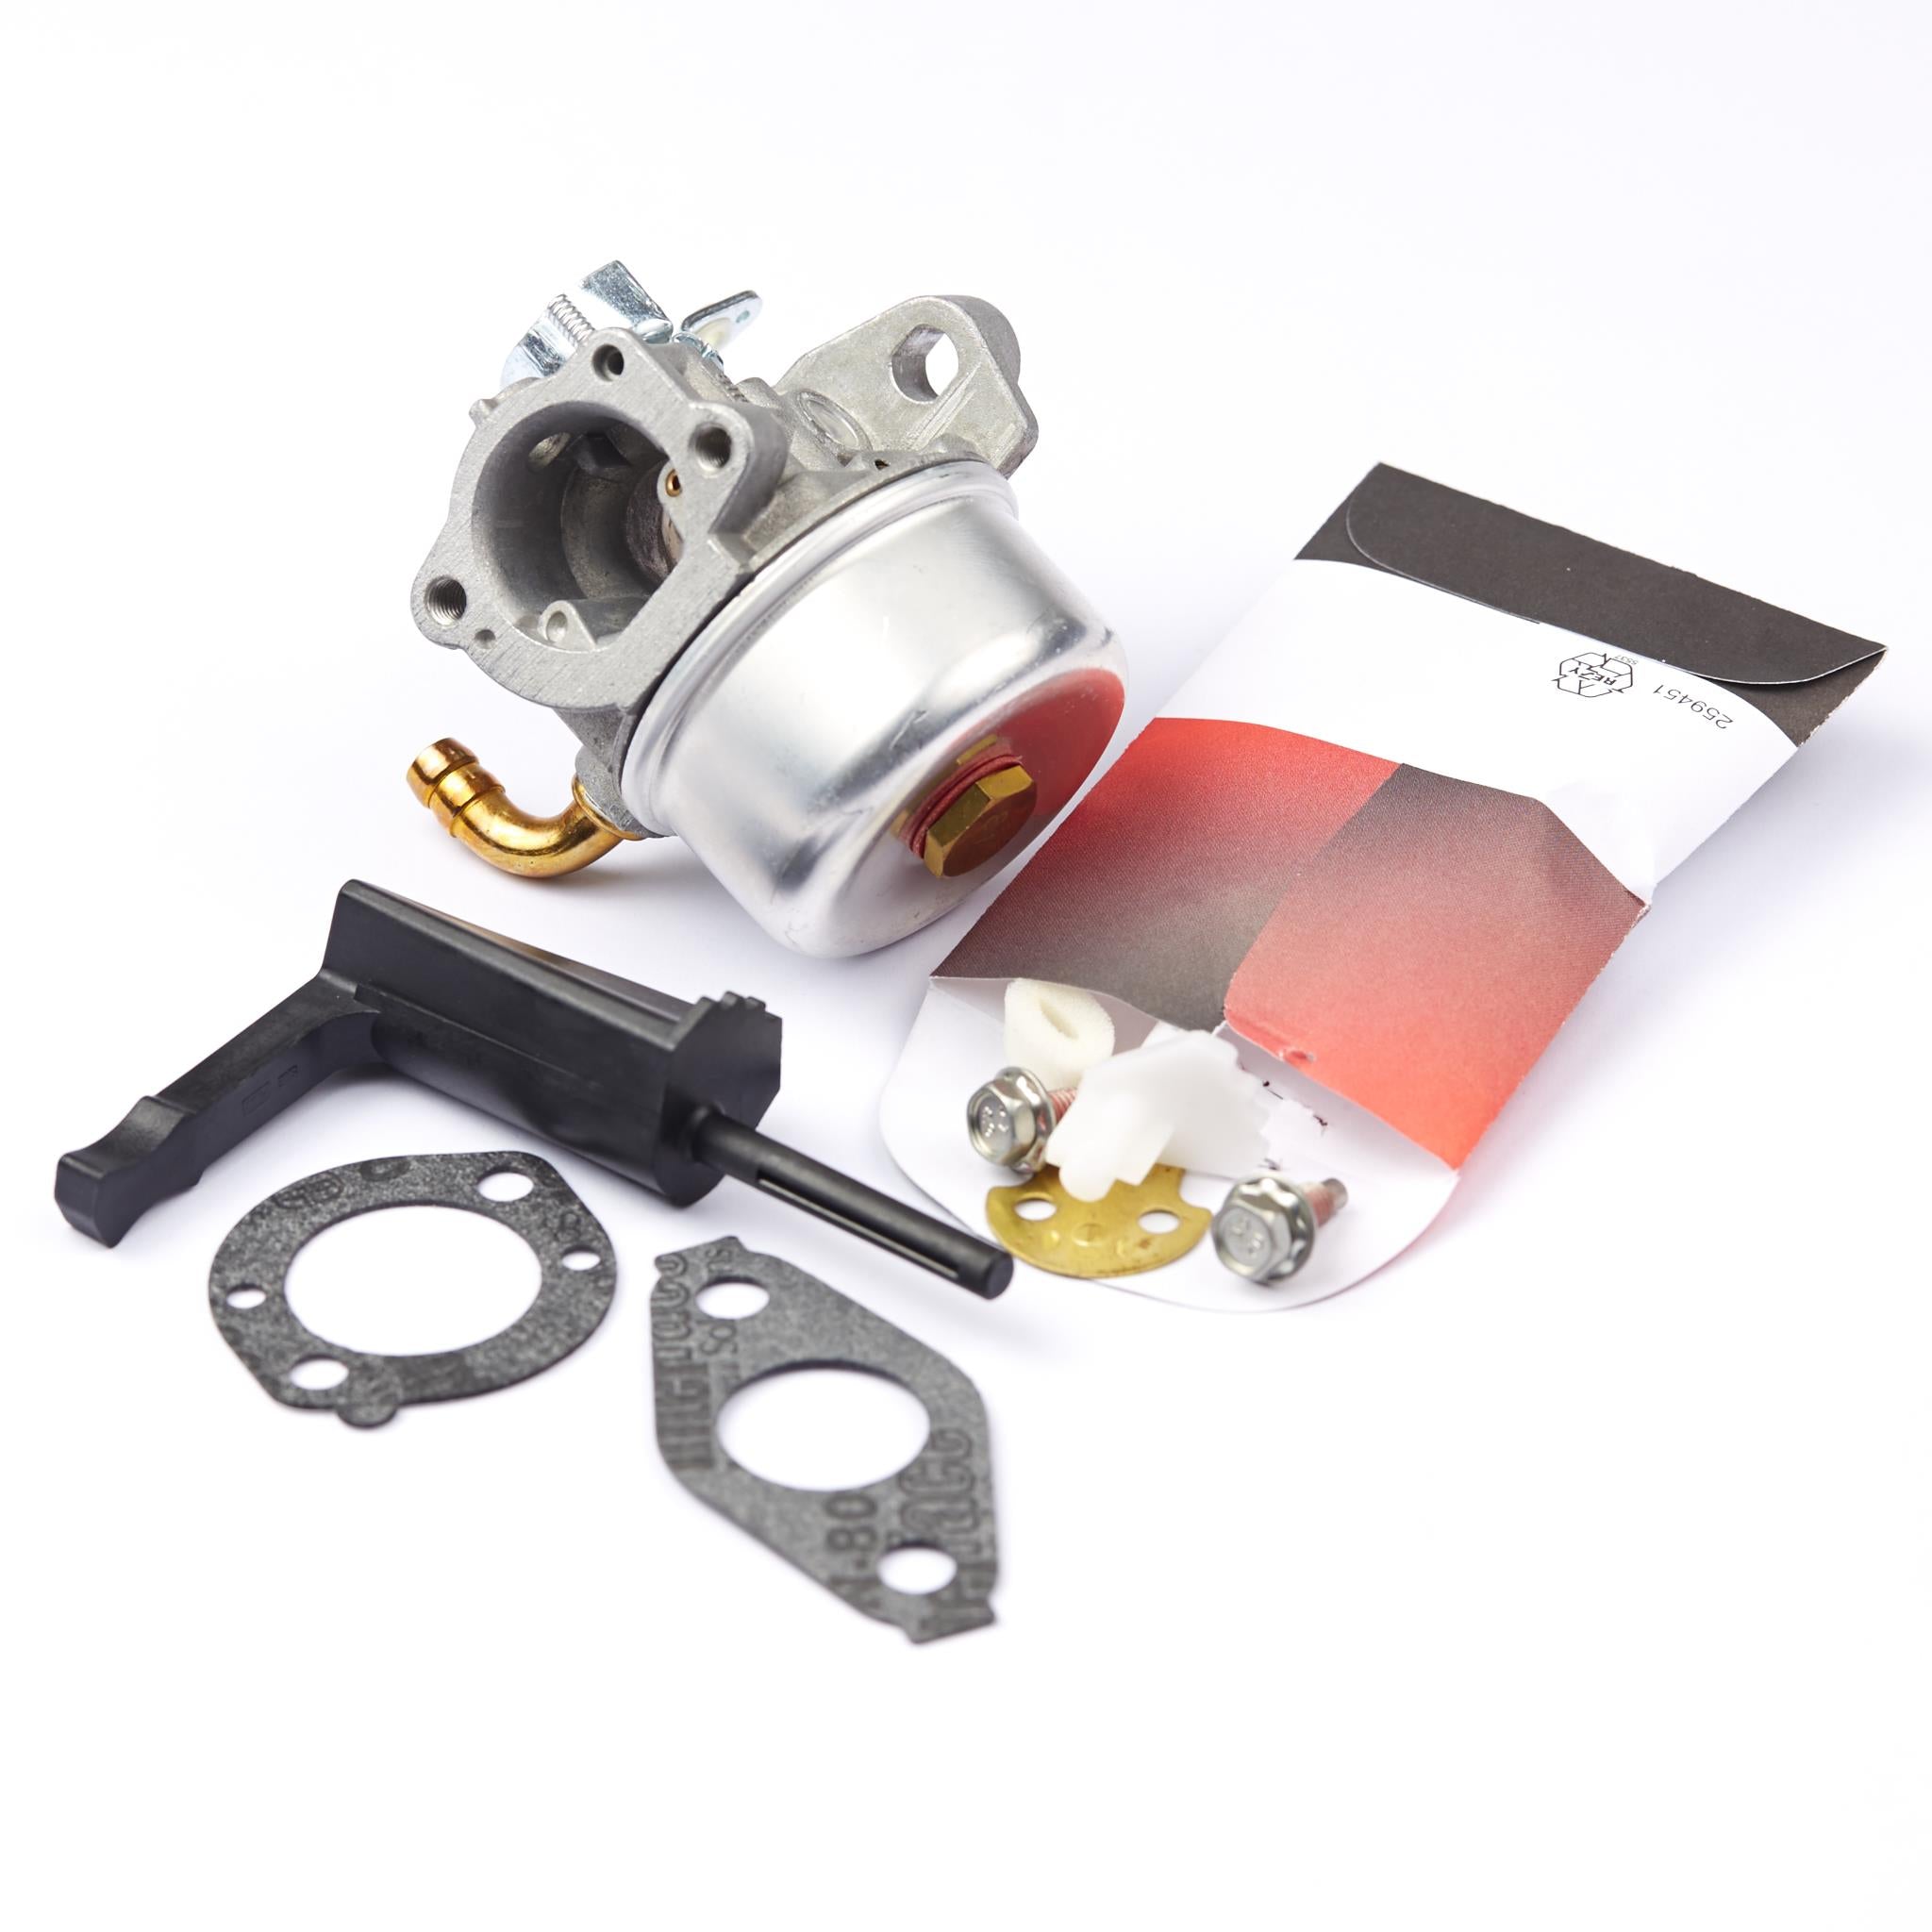  Wellsking 498298 Carburetor for Briggs and Stratton